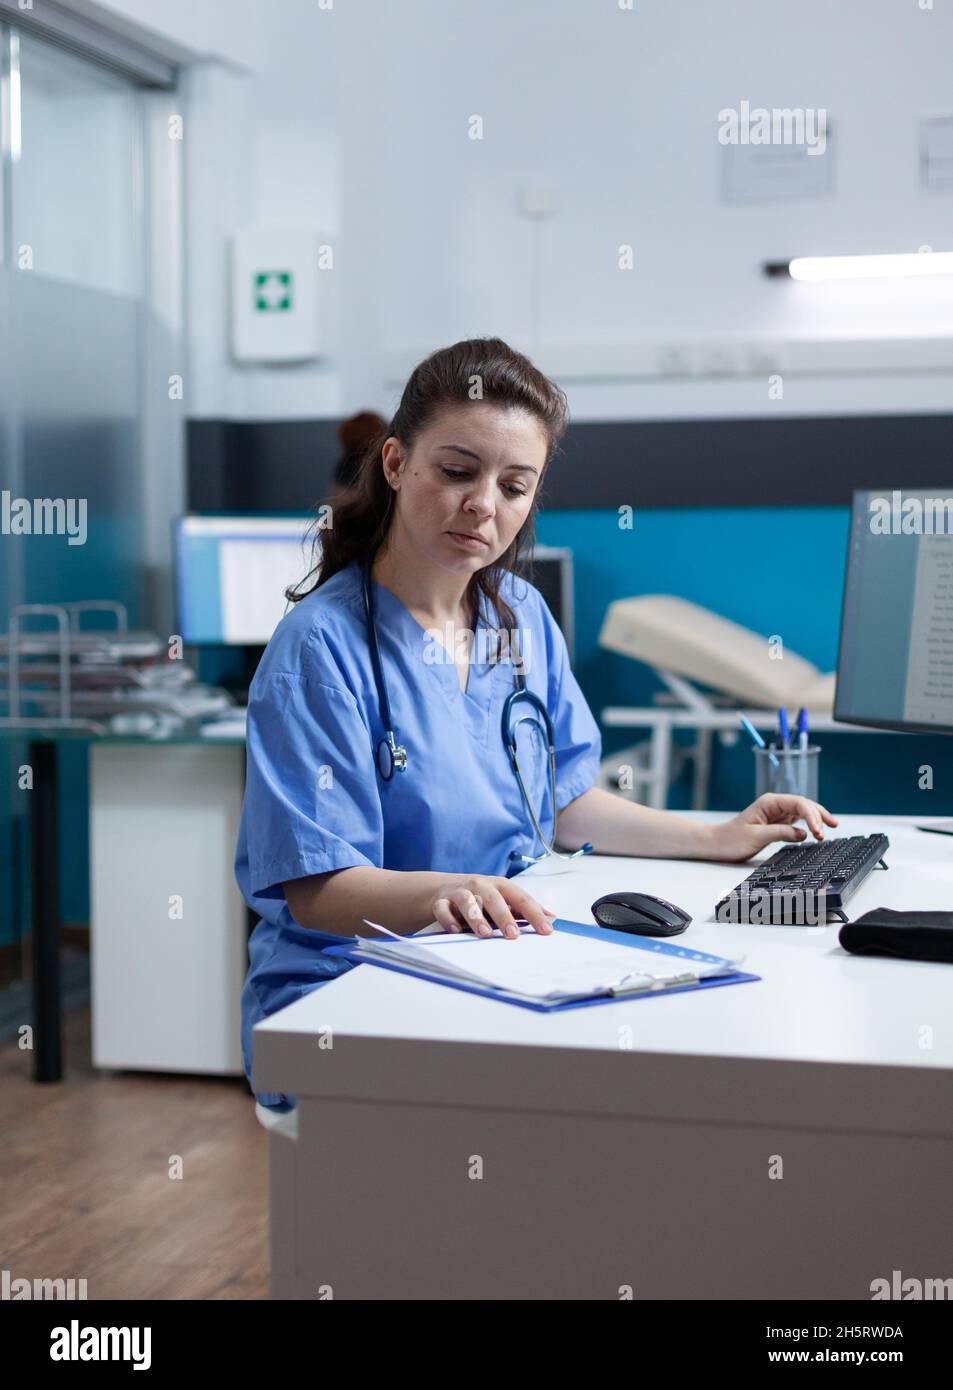 Practitioner nurse with stethoscope analyzing healthcare treatment on medical paperwork typing sickness expertise working in hospital examination office. Woman asisstance checking disease results Stock Photo